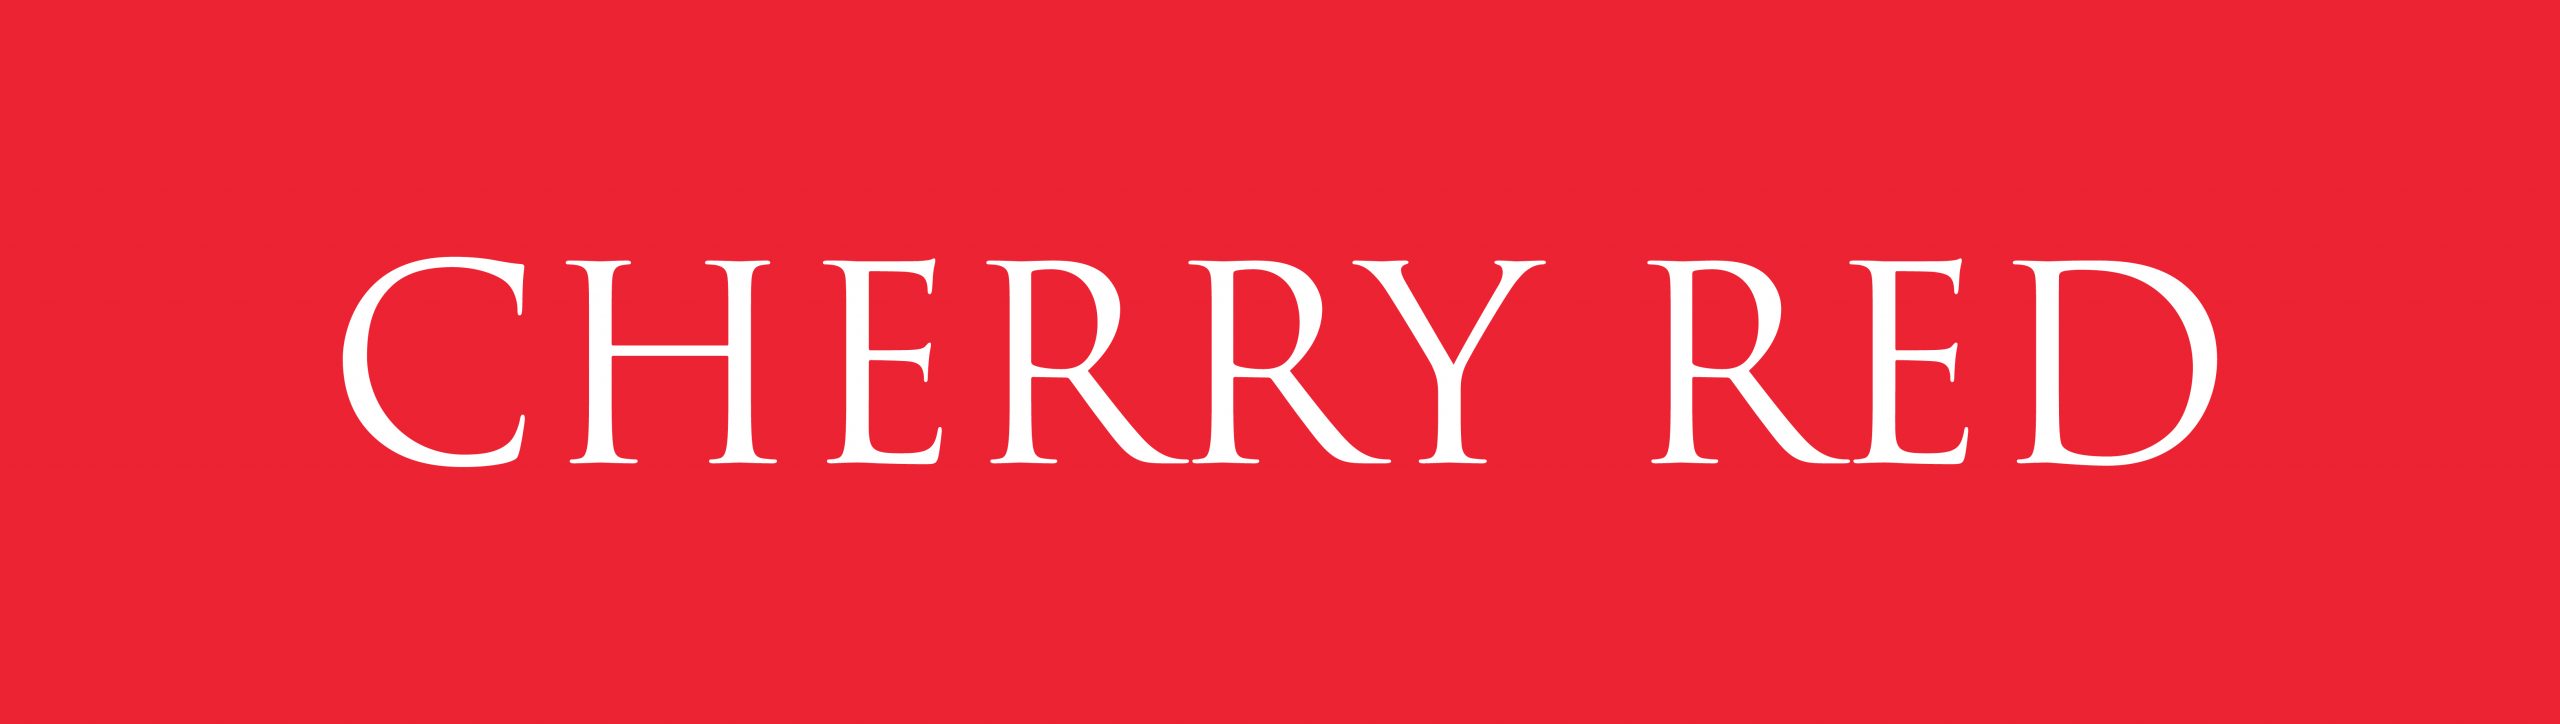 https://cherryred.com.au/wp-content/uploads/2020/02/New-CR_Red_Logo-scaled.jpg